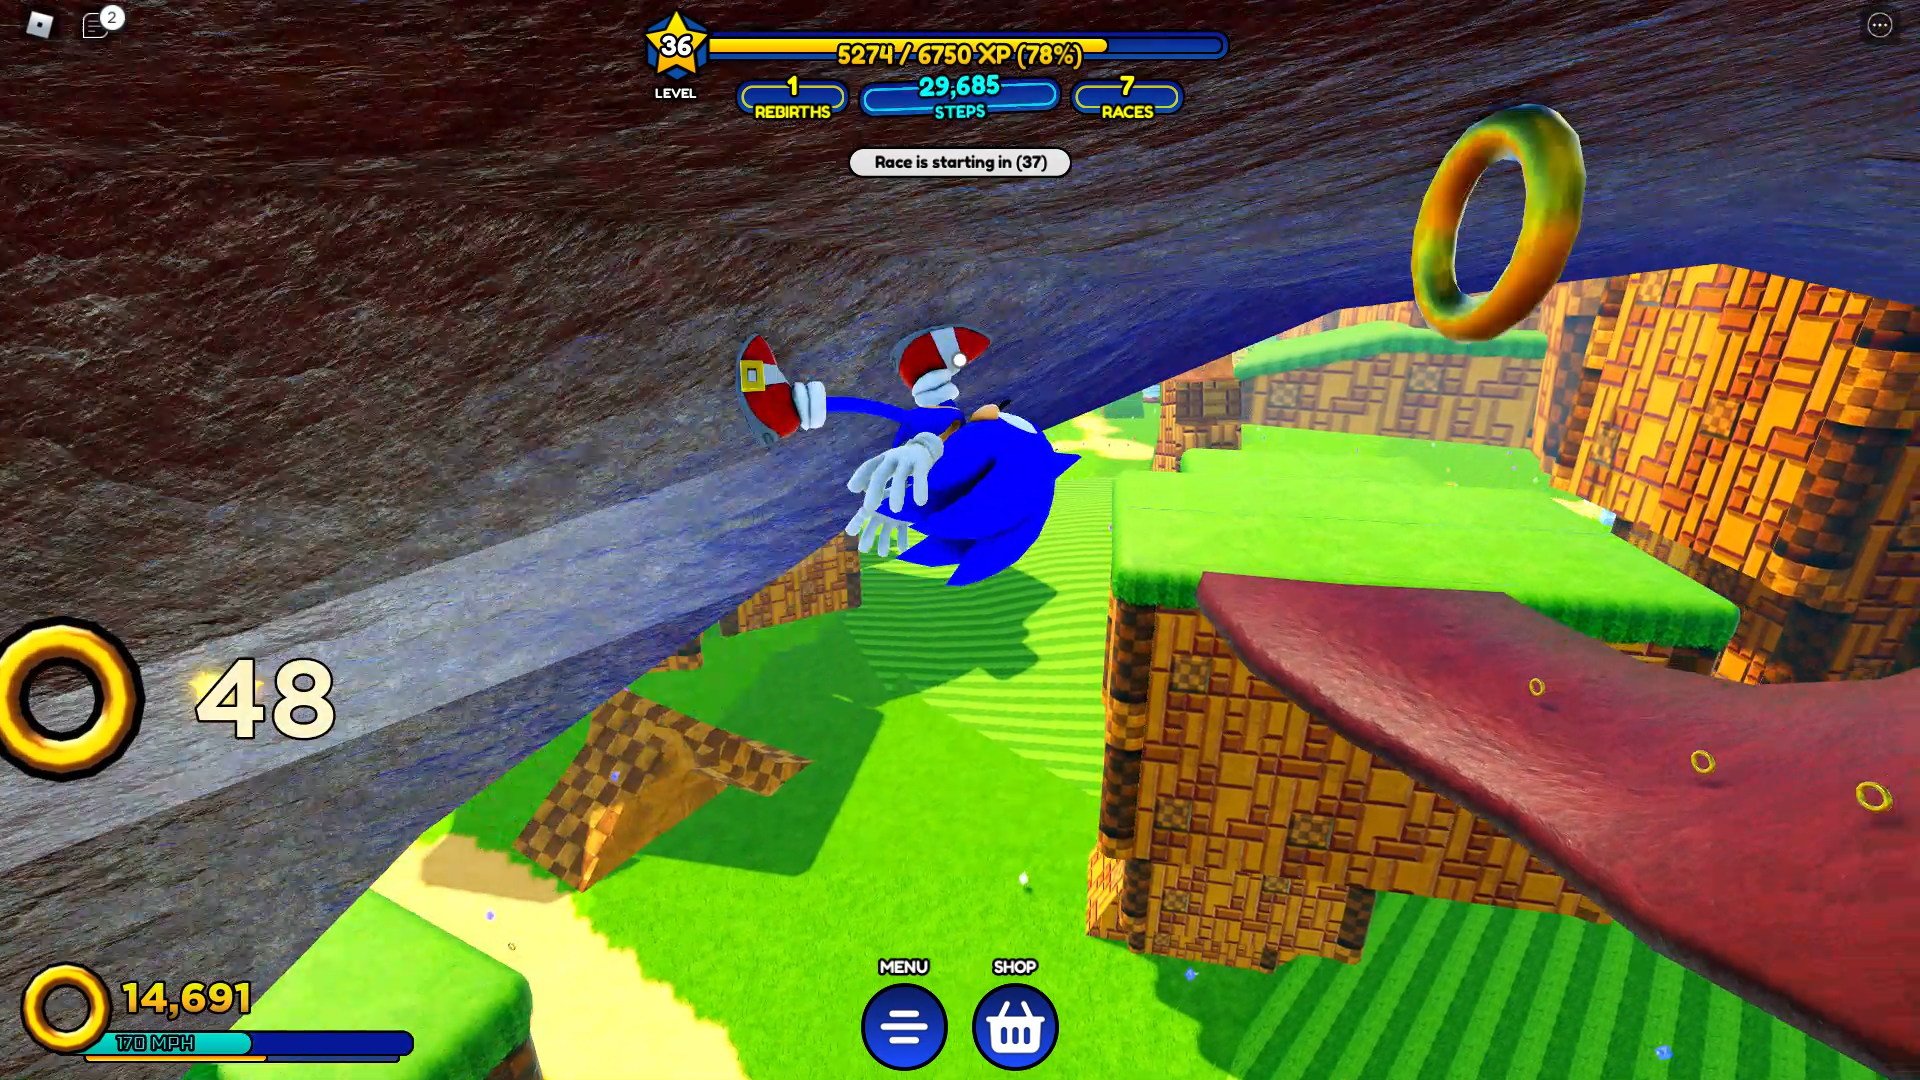 Sonic Speed Simulator review - Sonic collecting rings while running upside down on a rocky surface with green platforms in the background.